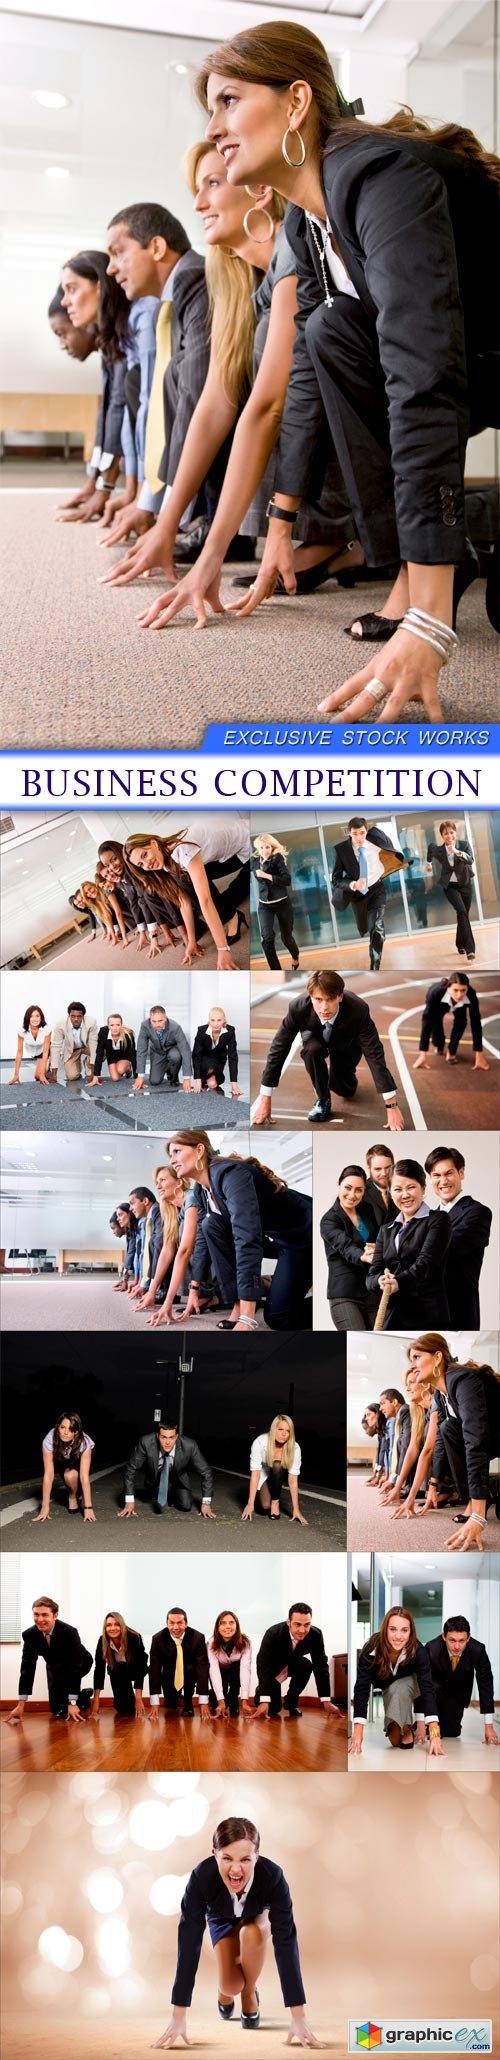 Business competition 11X JPEG